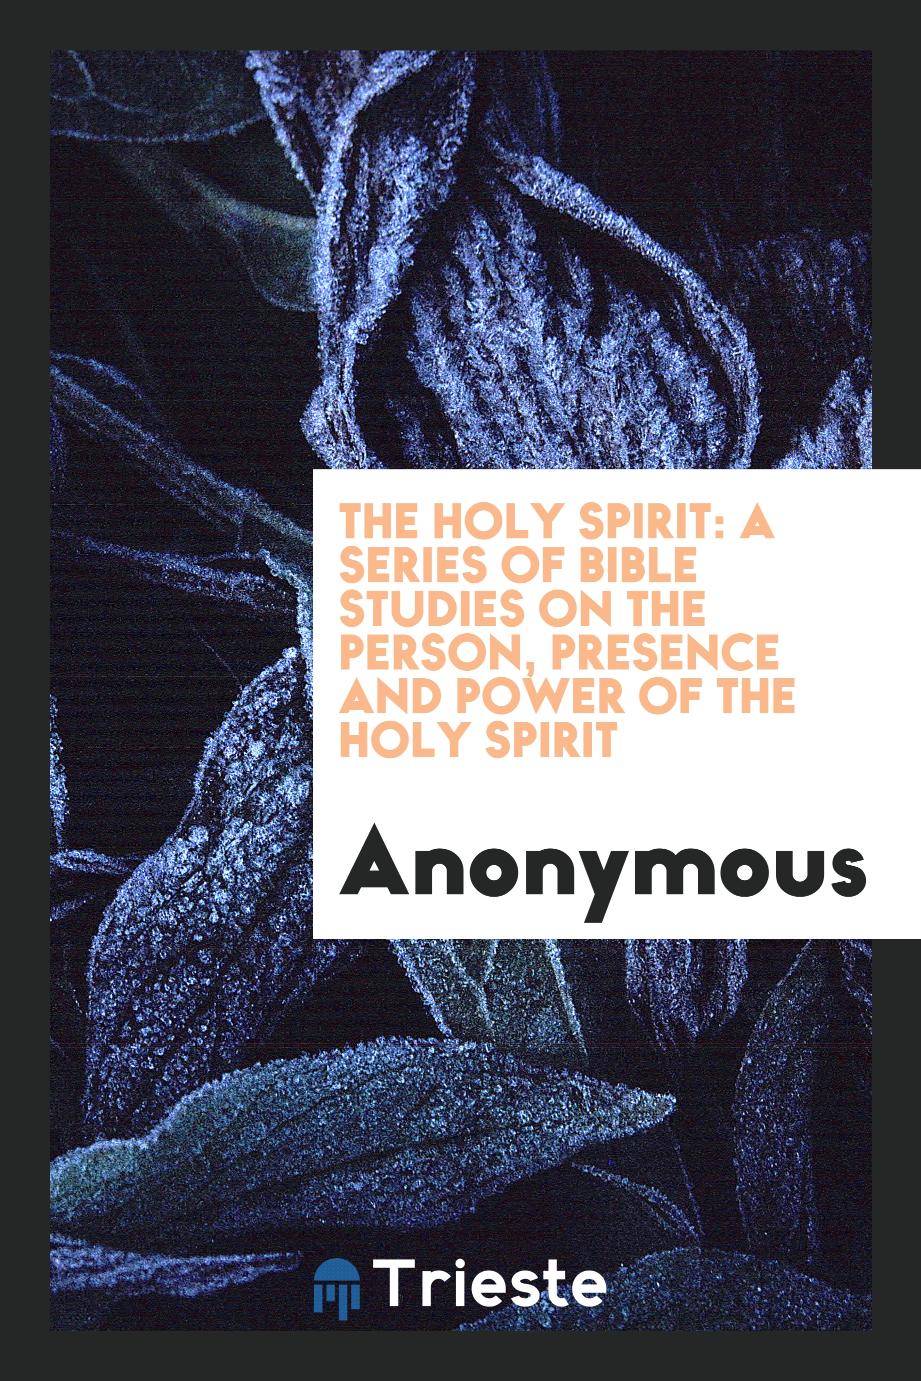 Anonymous - The Holy Spirit: a series of Bible studies on the person, presence and power of the Holy Spirit